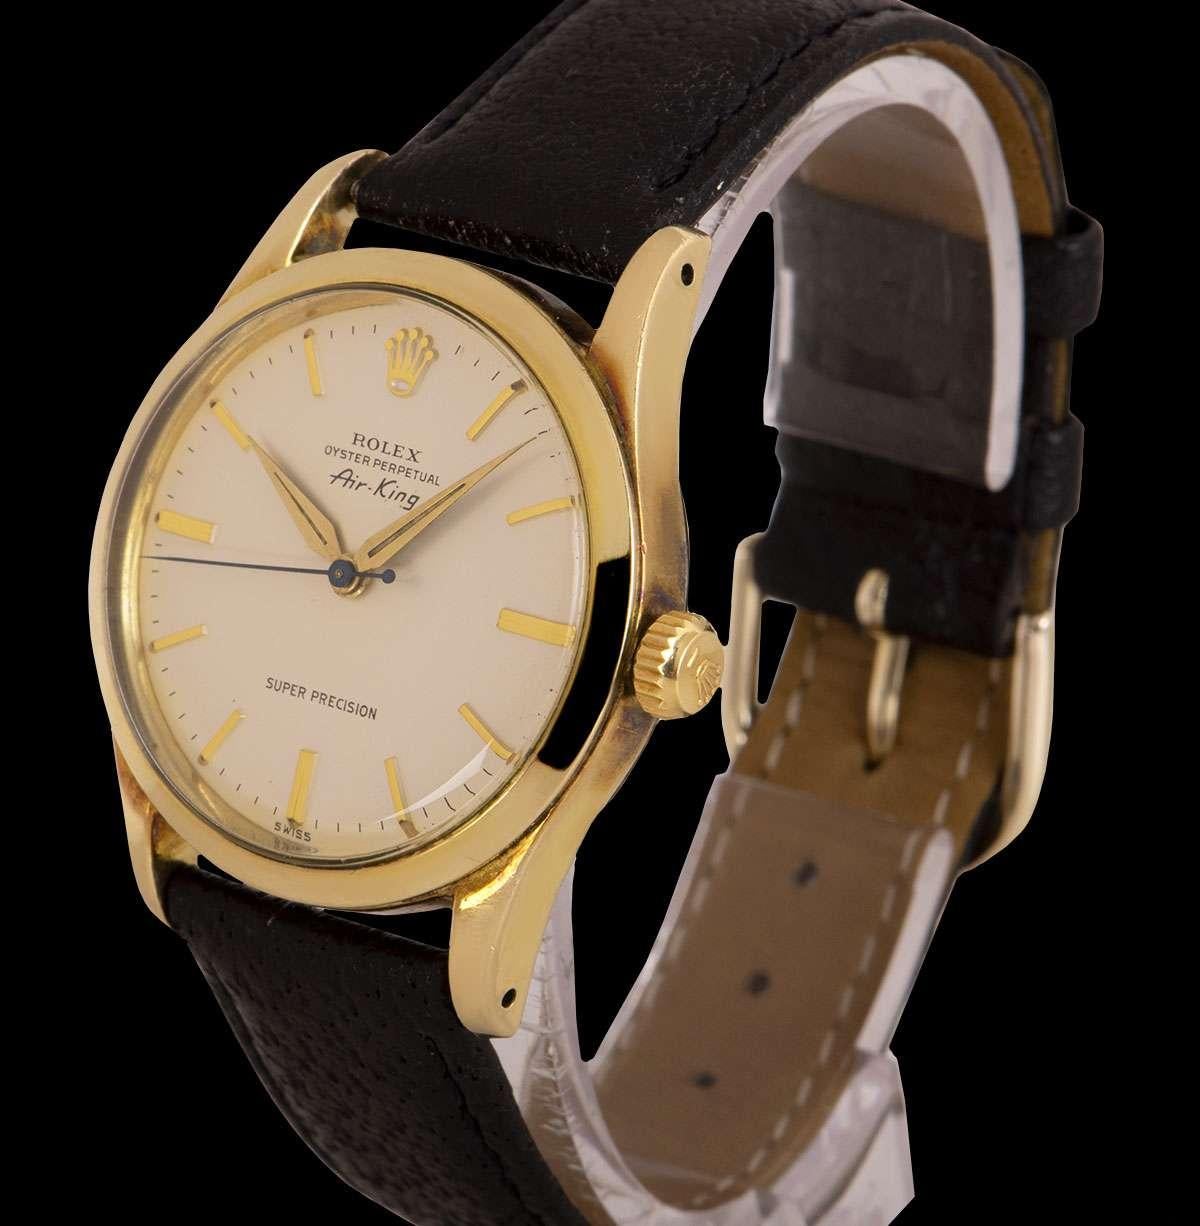 A 1960 34mm Gold Capped Oyster Perpetual Air-King Super Precision Vintage Gents Wristwatch, silver dial with applied hour markers, a fixed gold capped smooth bezel, a black leather strap with a gold plated pin buckle (both not by Rolex), plastic